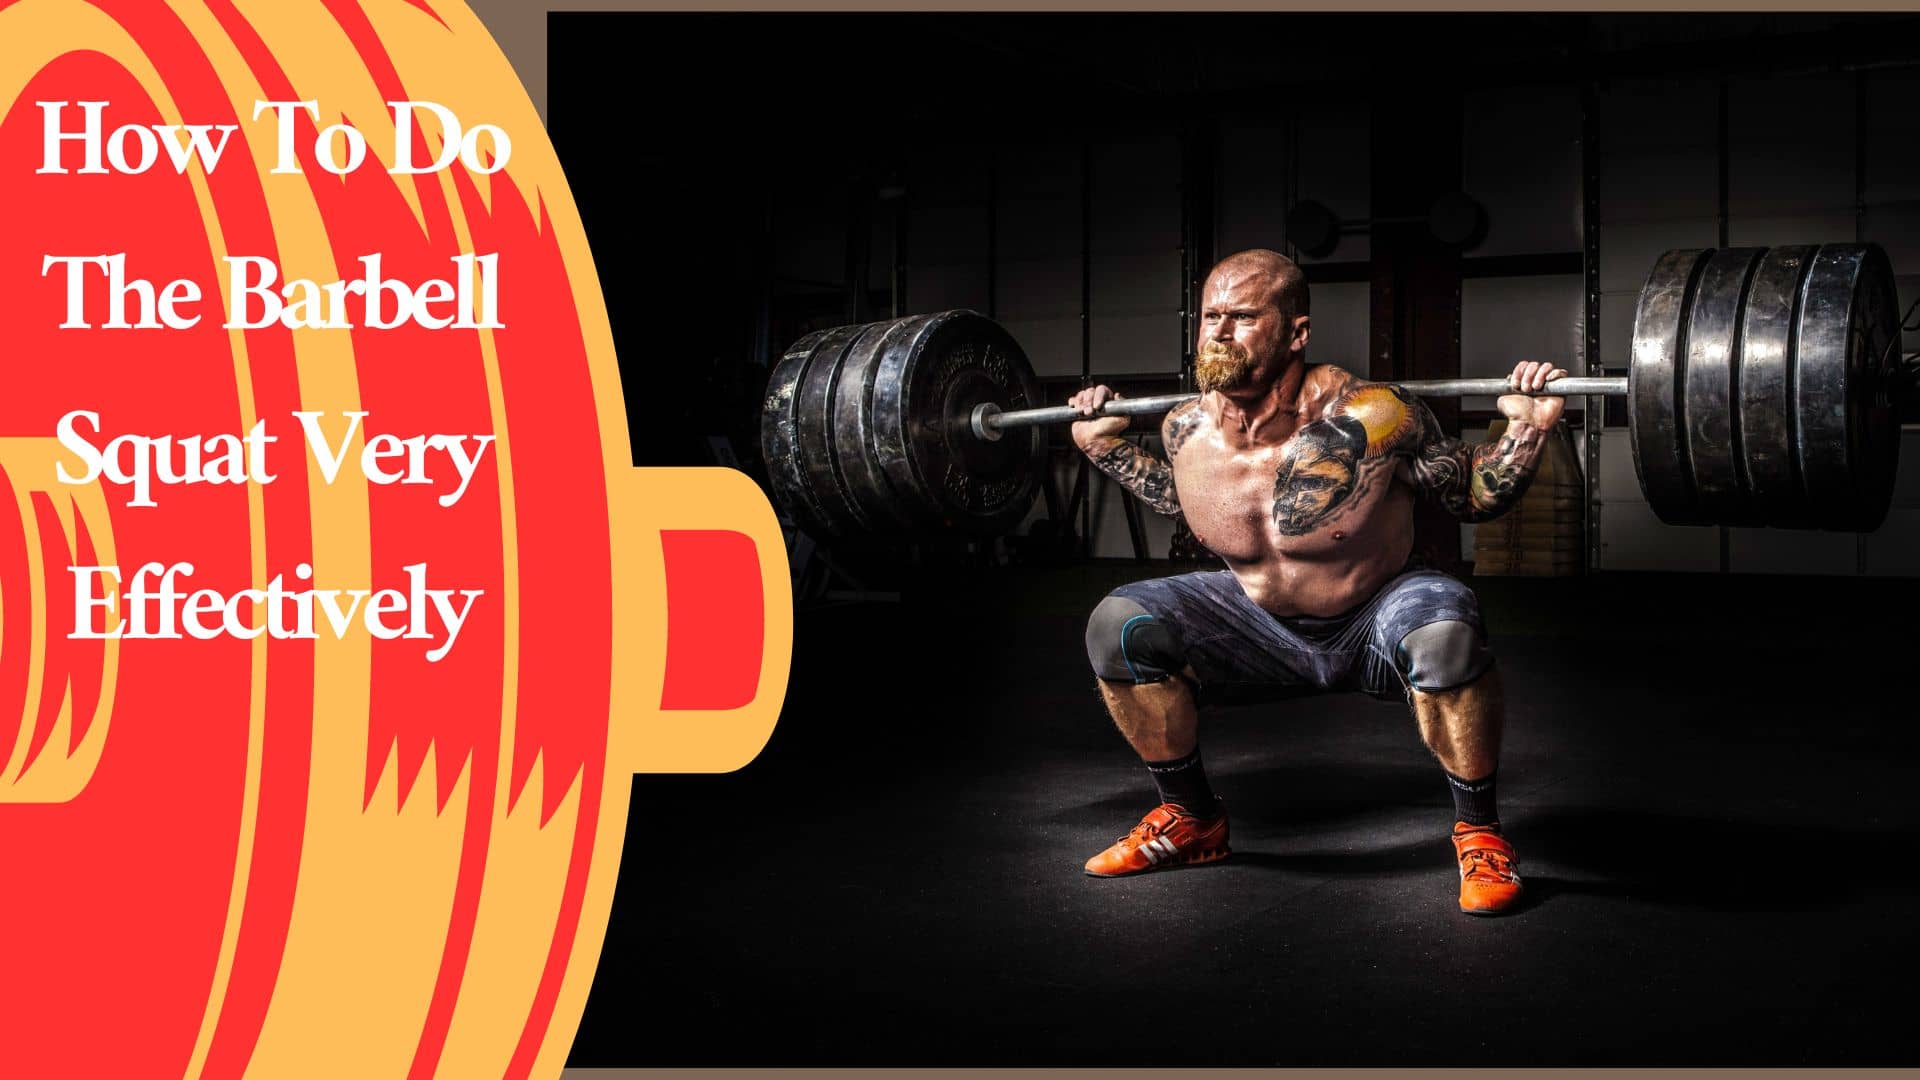 How To Do The Barbell Squat Very Effectively